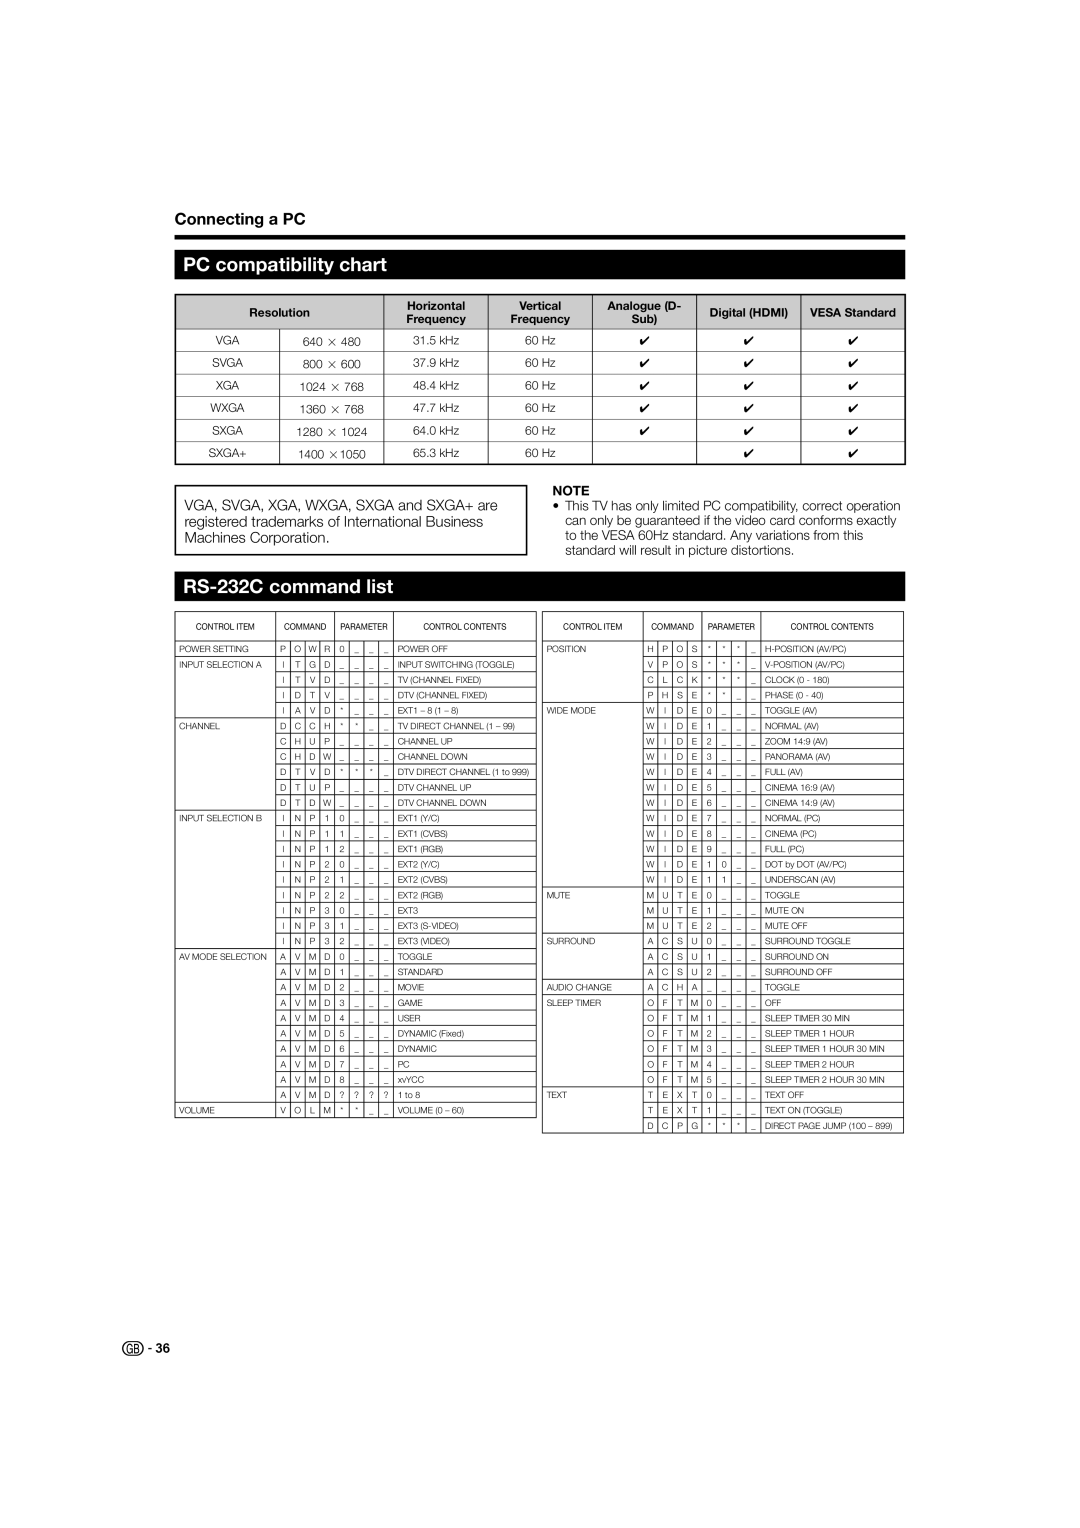 Sharp LC-46XL2E, LC-46XL2S, LC-42XL2S, LC-42XL2E PC compatibility chart, RS-232C command list, Connecting a PC, Frequency 